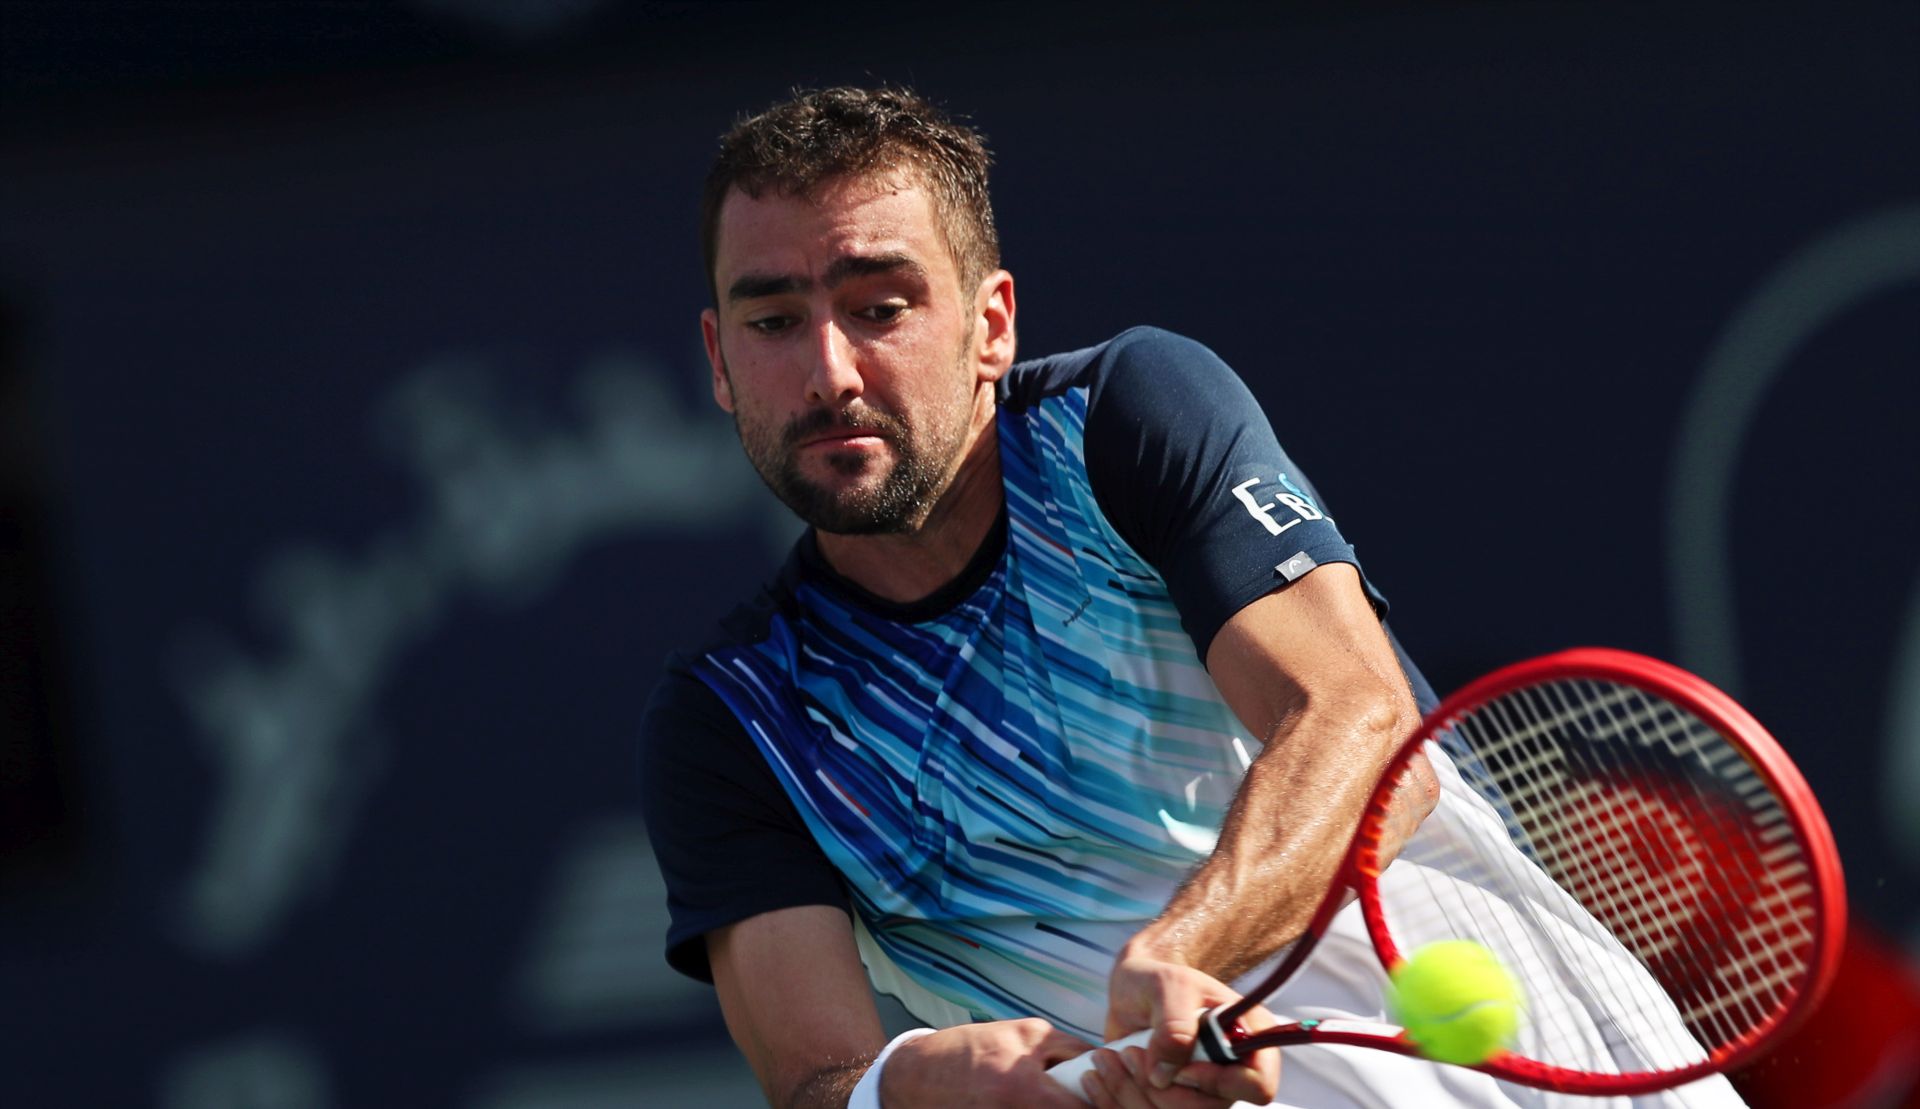 epa08246488 Marin Cilic of Croatia in action during his first round match against Benoit Paire of France at the Dubai Duty Free Tennis ATP Championships 2020 in Dubai, United Arab Emirates, 25 February 2020.  EPA/ALI HAIDER